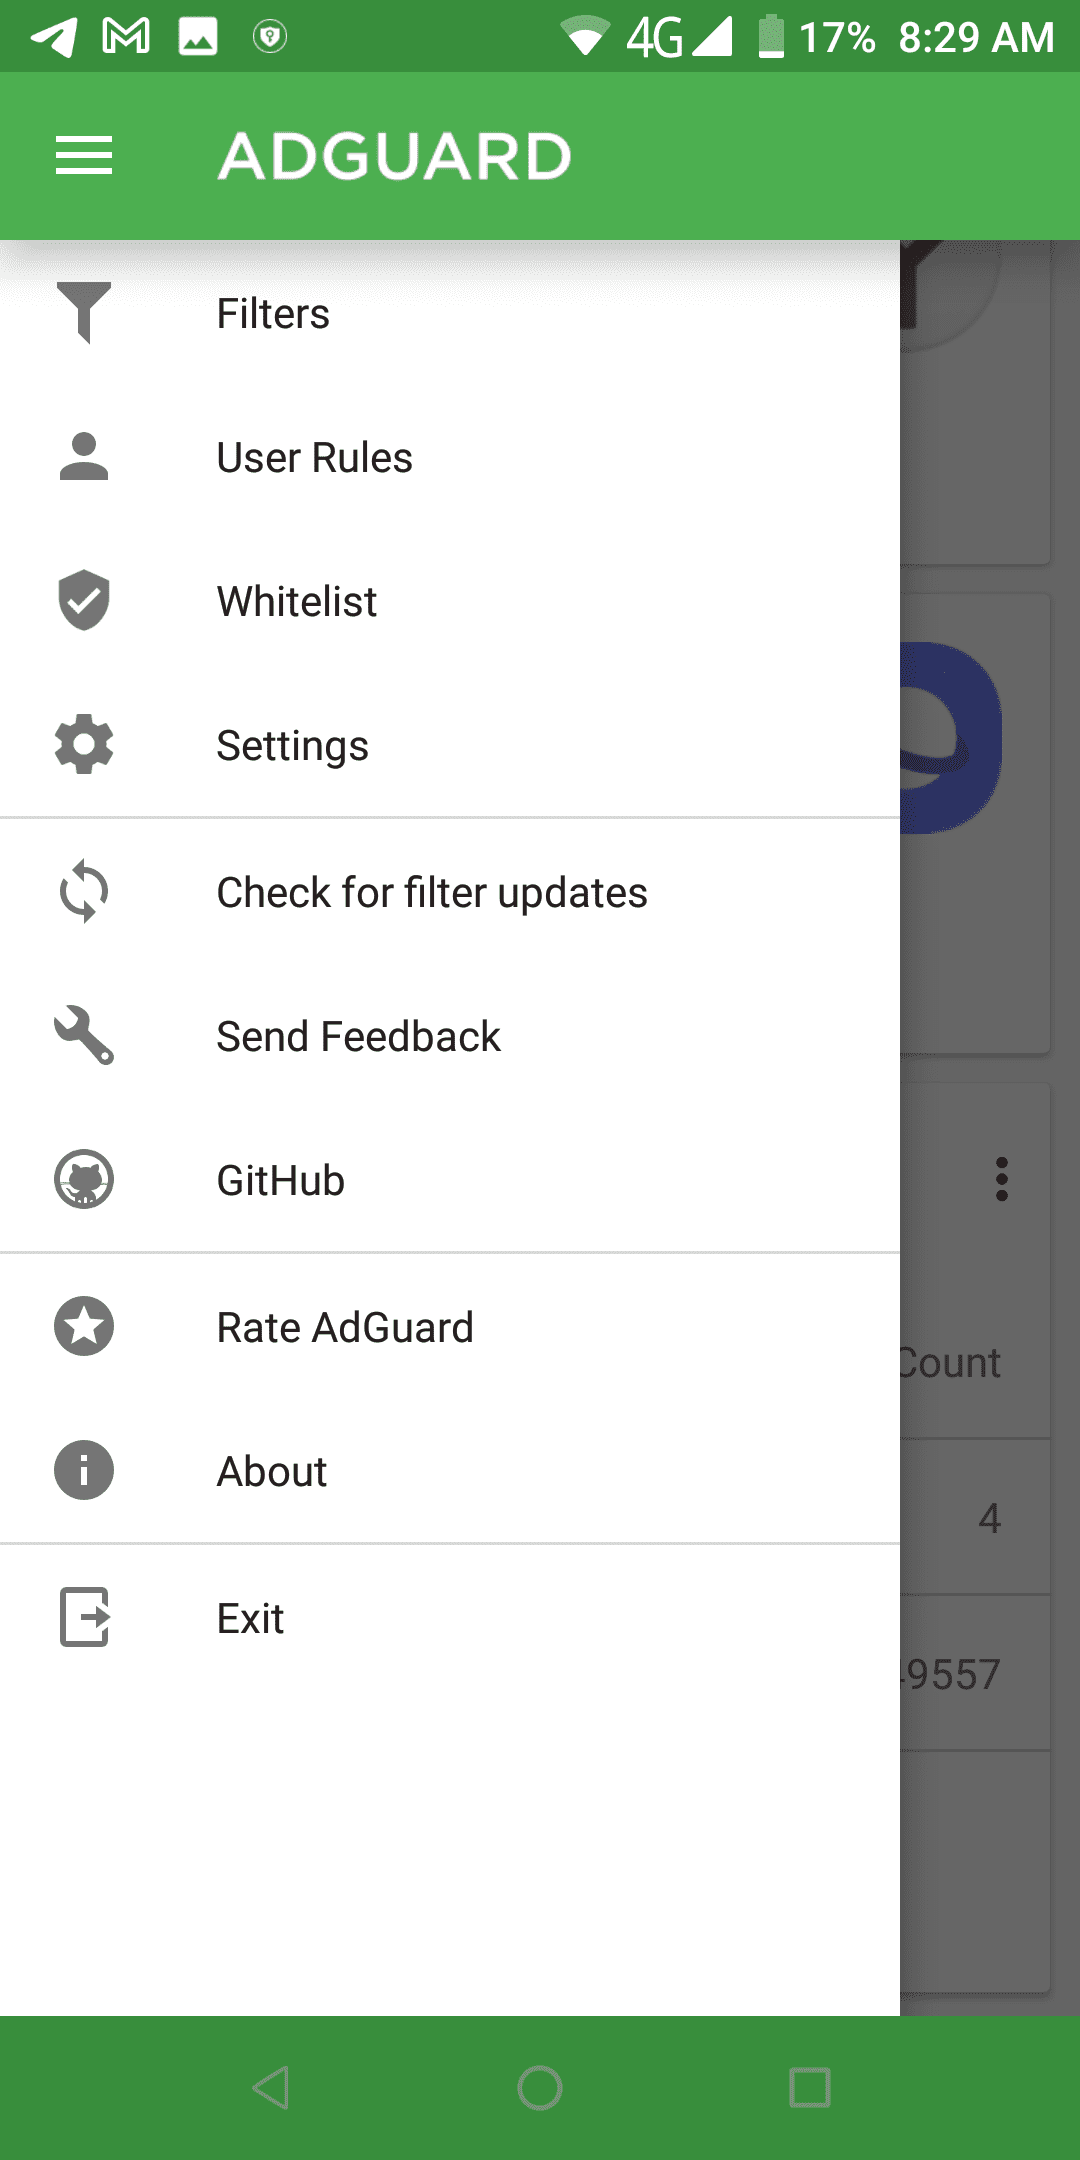 adguard apps for android